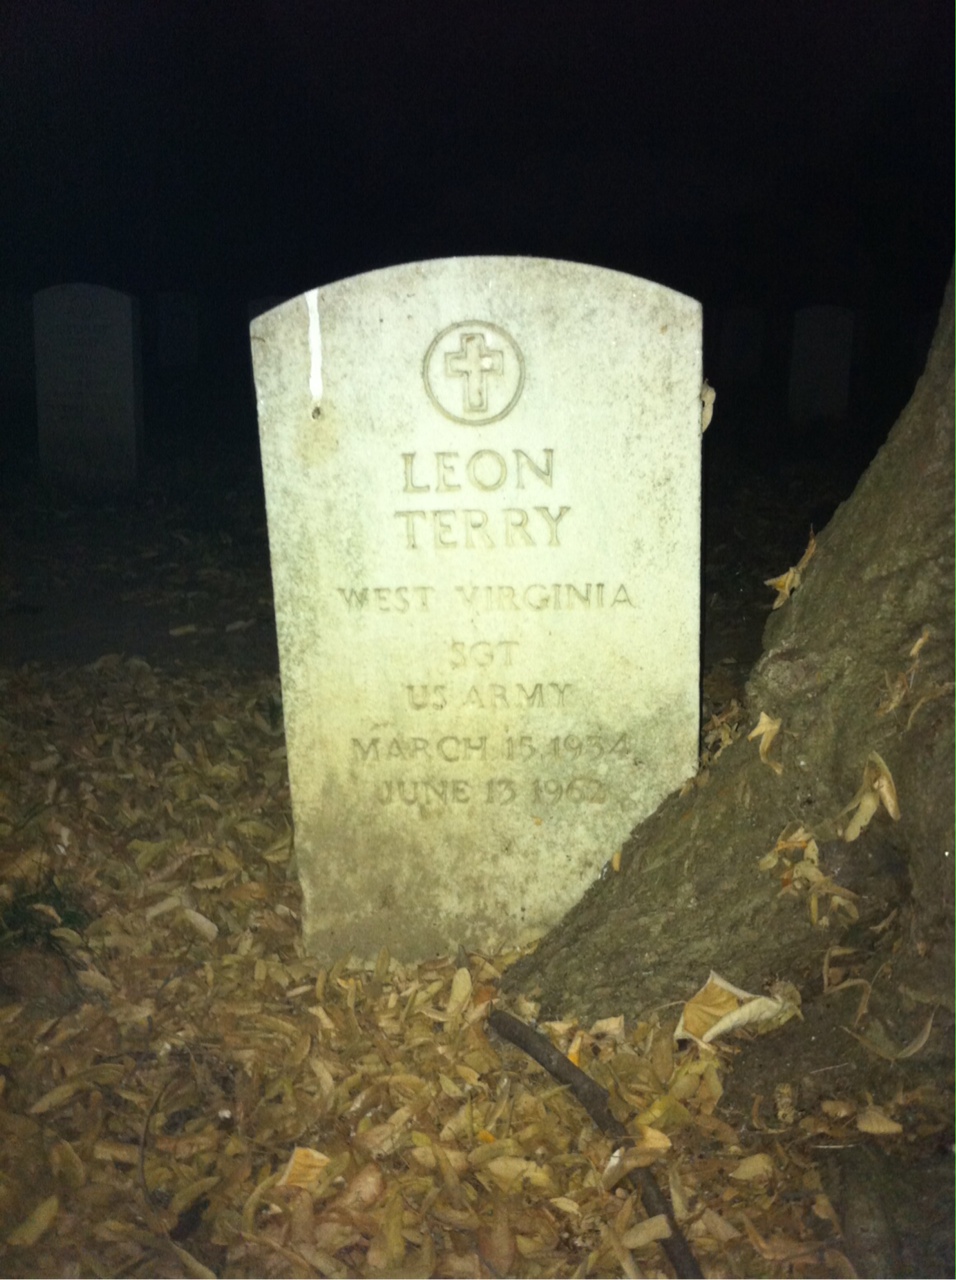 Sergeant Leon Terry | United States Army Military Police Corps, U.S. Government